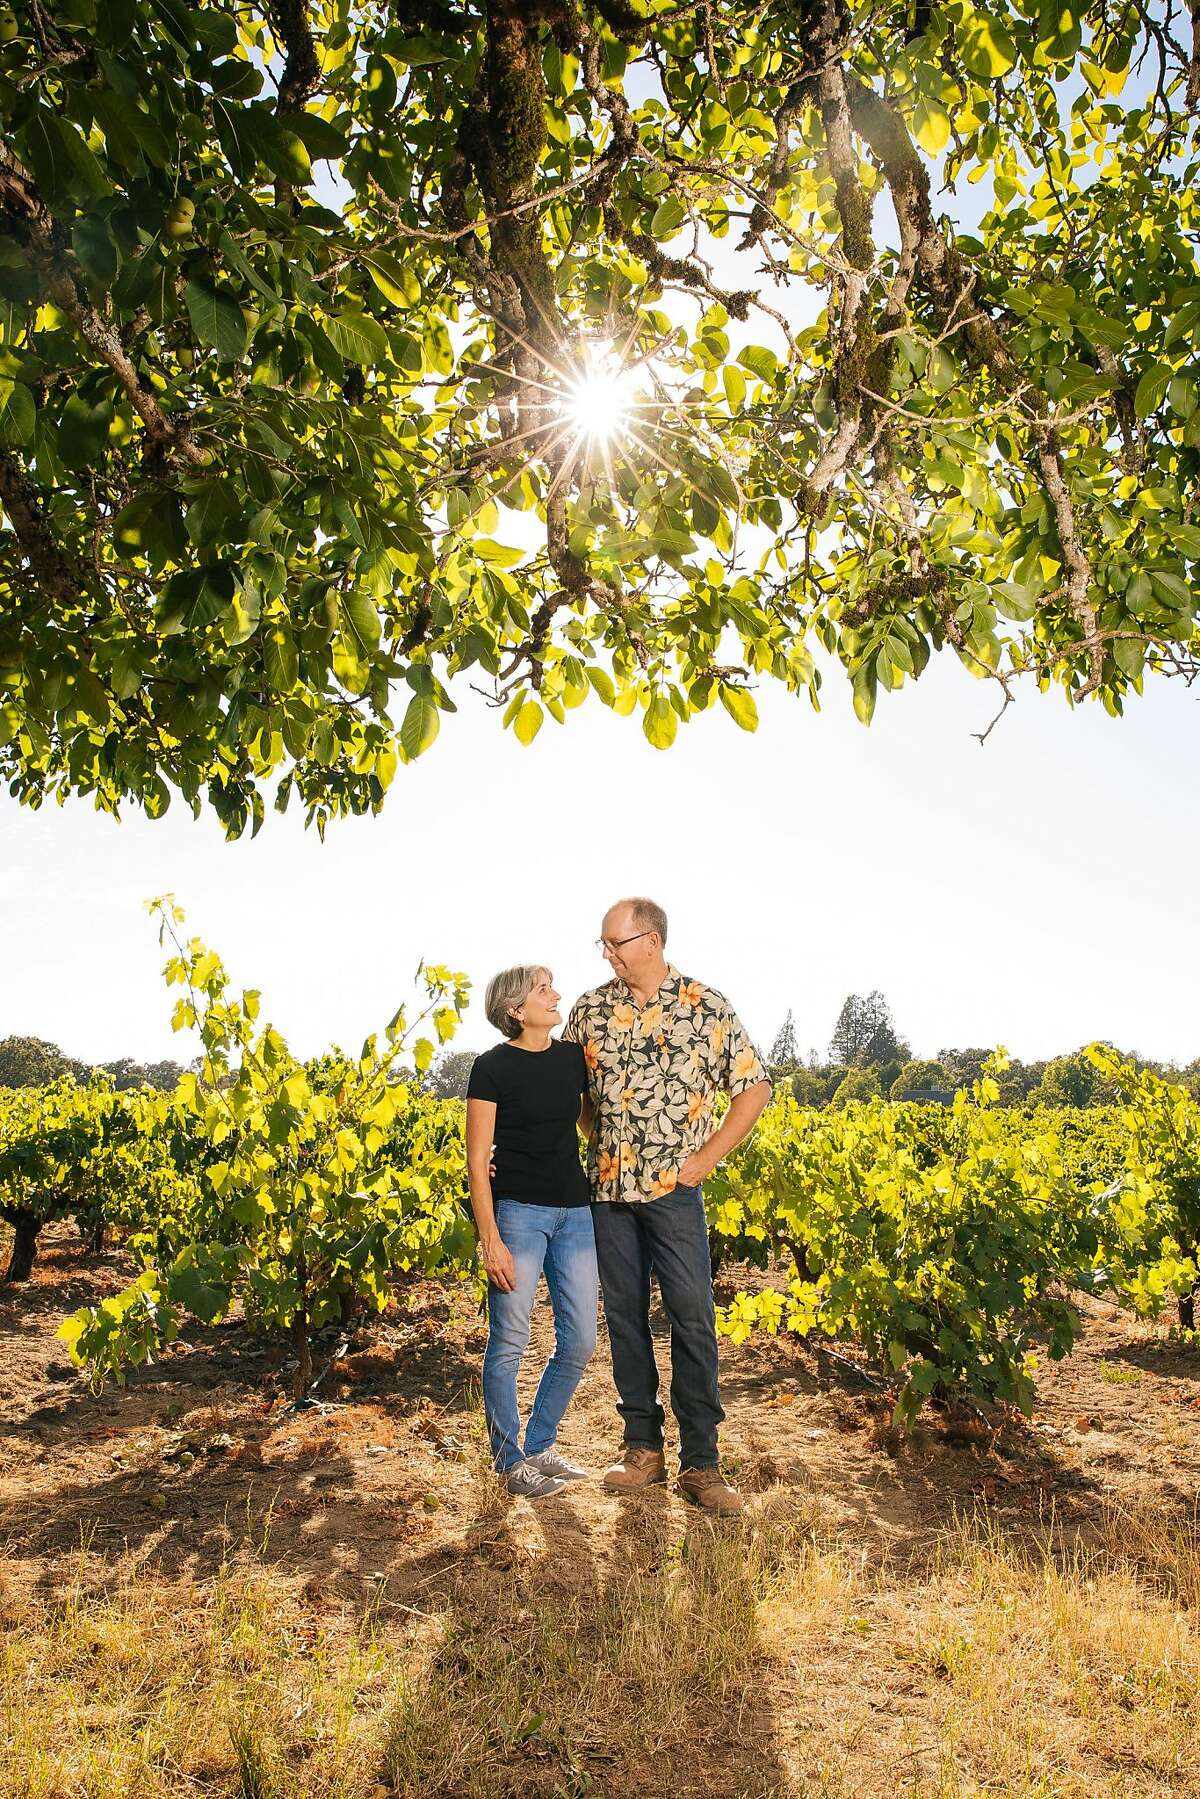 Mike Officer and Kendall Officer, owners of the Carlisle Winery and Vineyard, photographed in the Carlisle Vineyard in Windsor, Calif. Saturday, July 22, 2017.